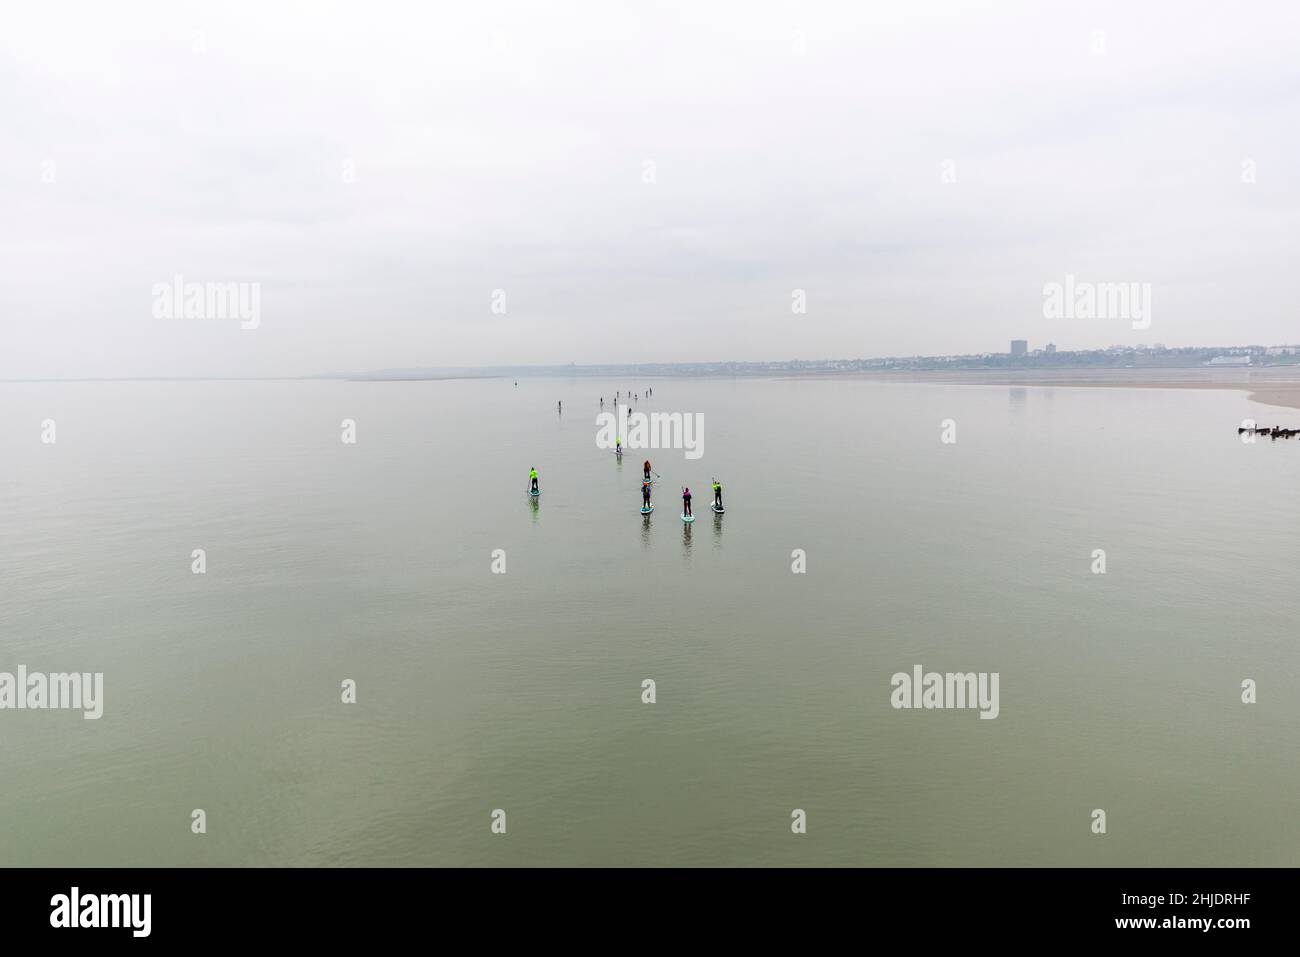 Paddle boarding group out on the Thames Estuary early morning returning towards Chalkwell after passing Southend Pier. Flat calm. Wide expanse Stock Photo